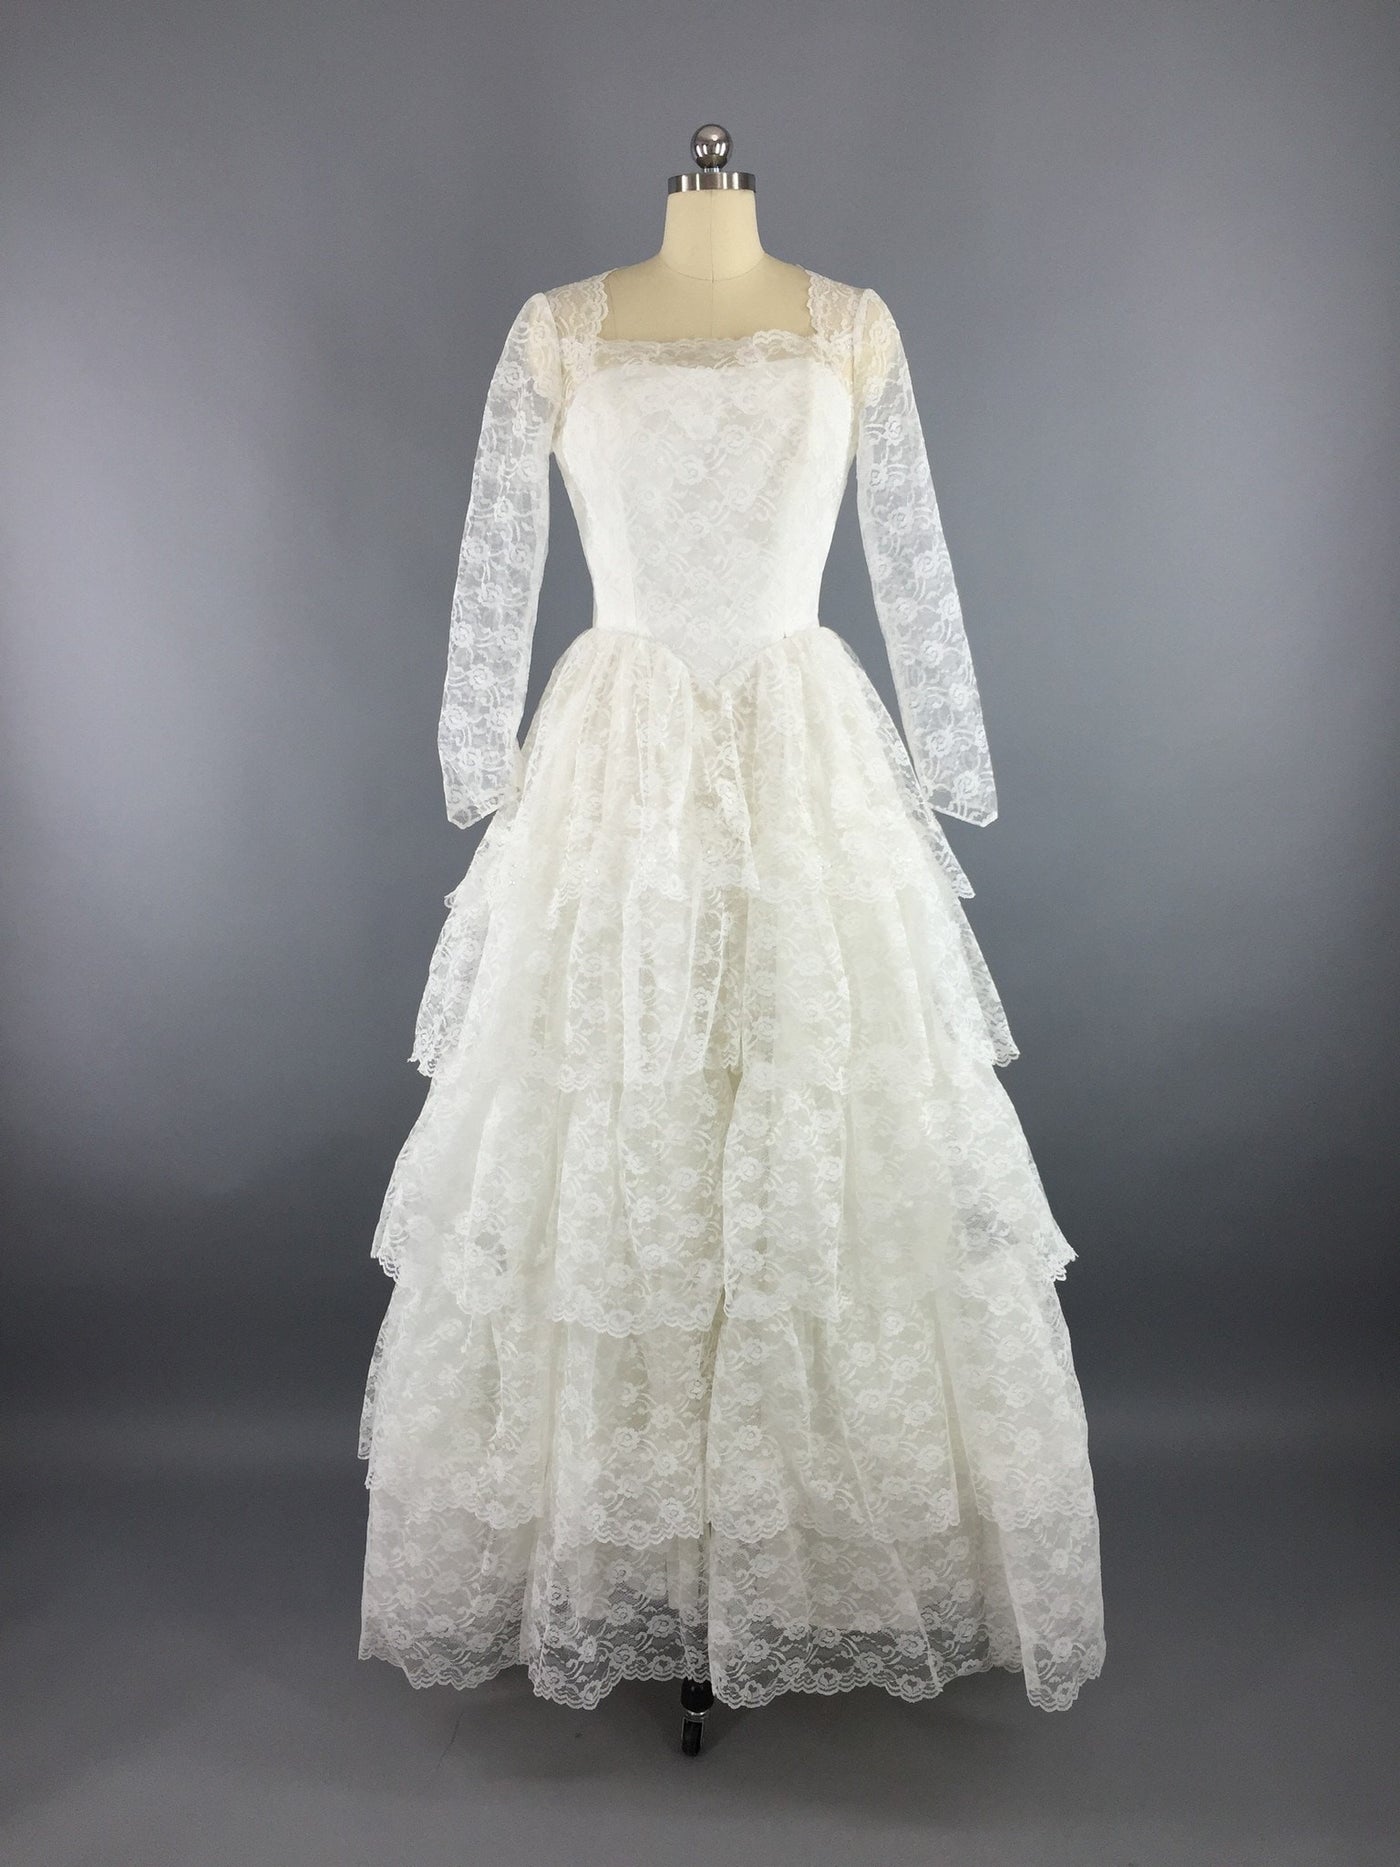 Vintage 1950s Wedding Dress / Tiered Lace Bridal Gown - ThisBlueBird